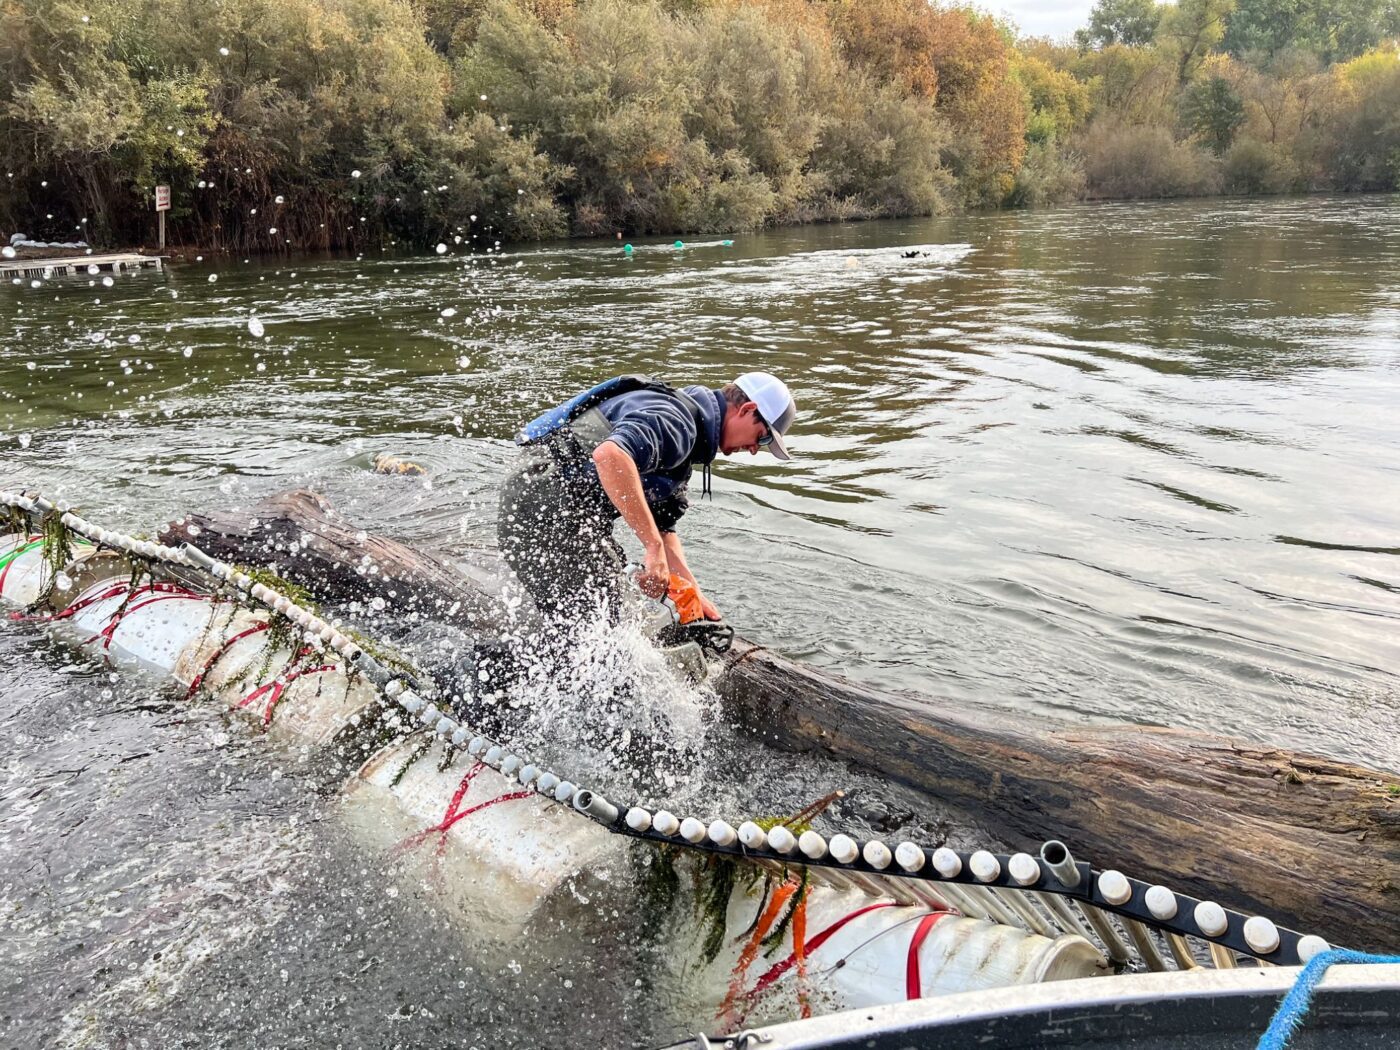 A man is using a chainsaw to cut and remove a large log caught in a weir.